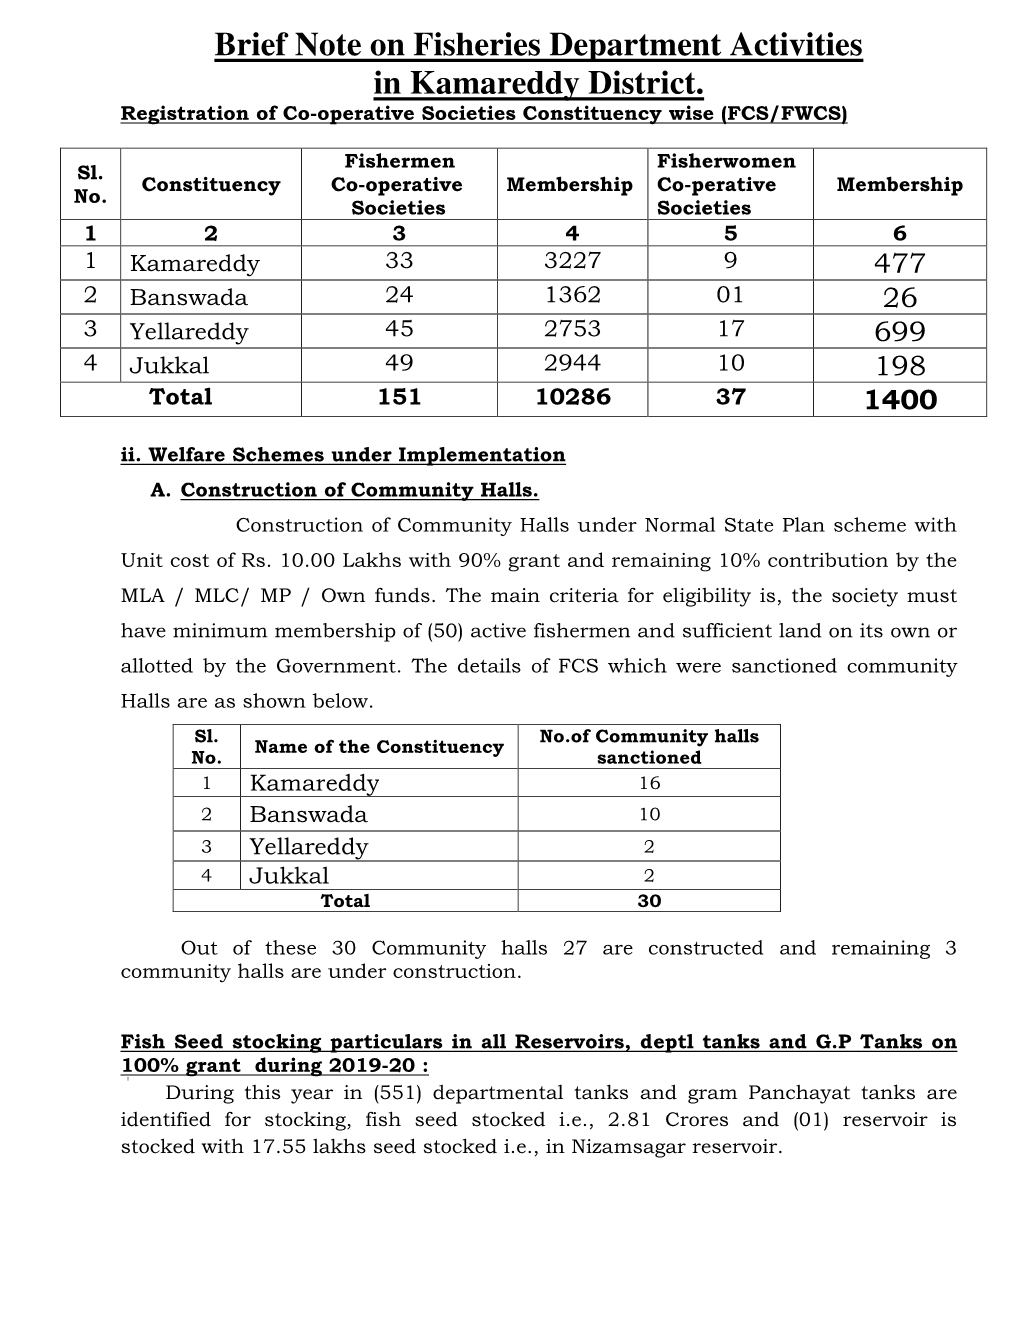 Brief Note on Fisheries Department Activities in Kamareddy District. Registration of Co-Operative Societies Constituency Wise (FCS/FWCS)